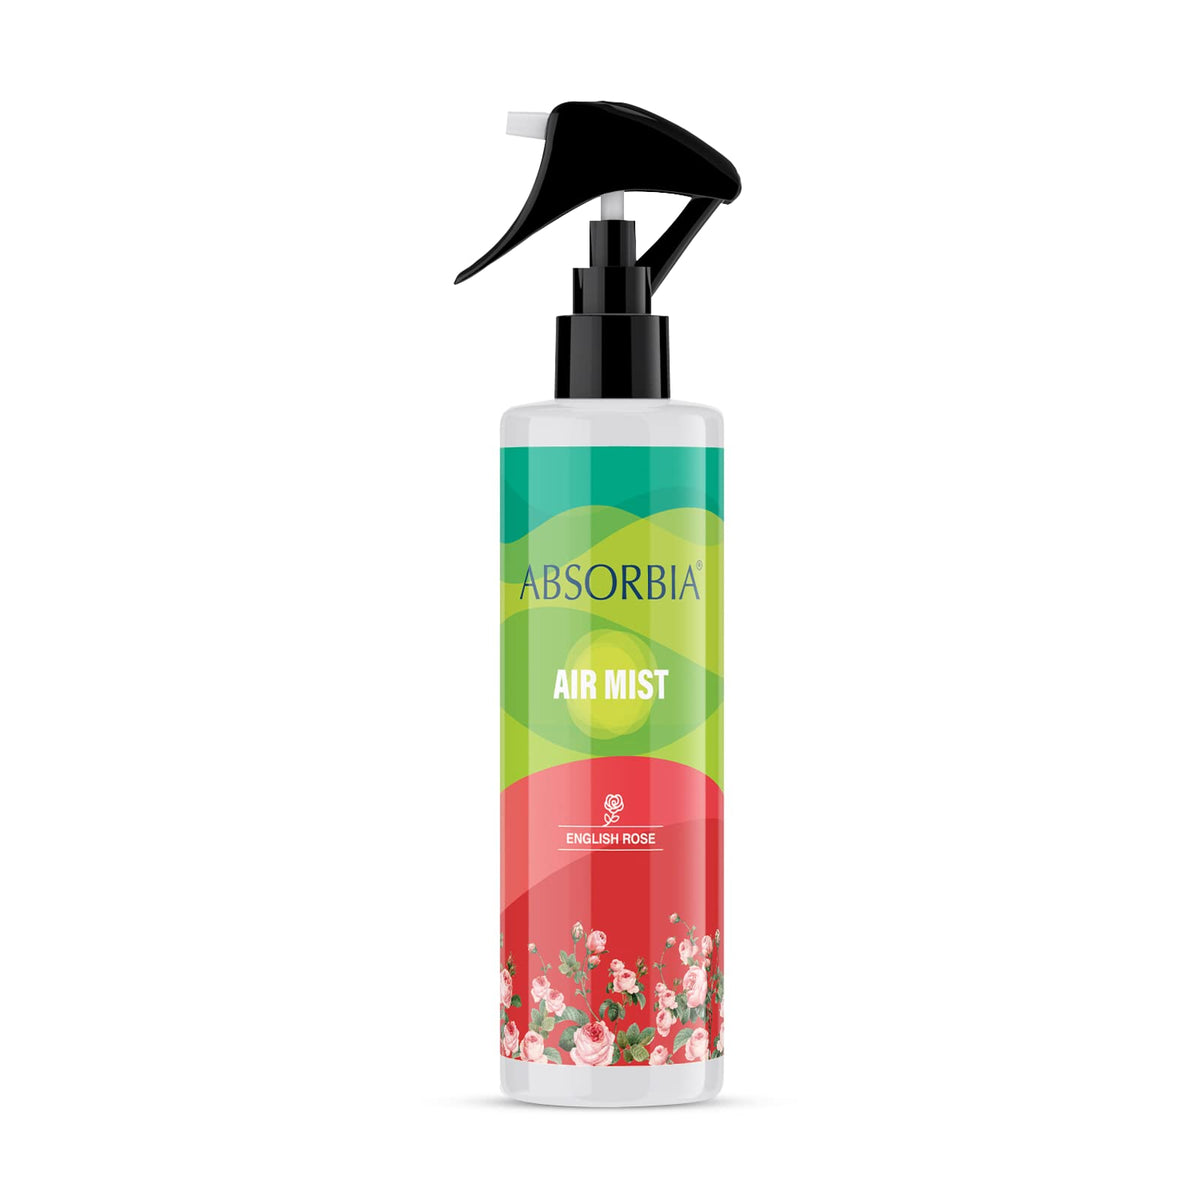 ABSORBIA Room Freshner spray, Instantly Freshens the air with Rose Fragrance, Essential Oil Aroma Works like therapy - 200ML, 1000+ sprays(Approx)…